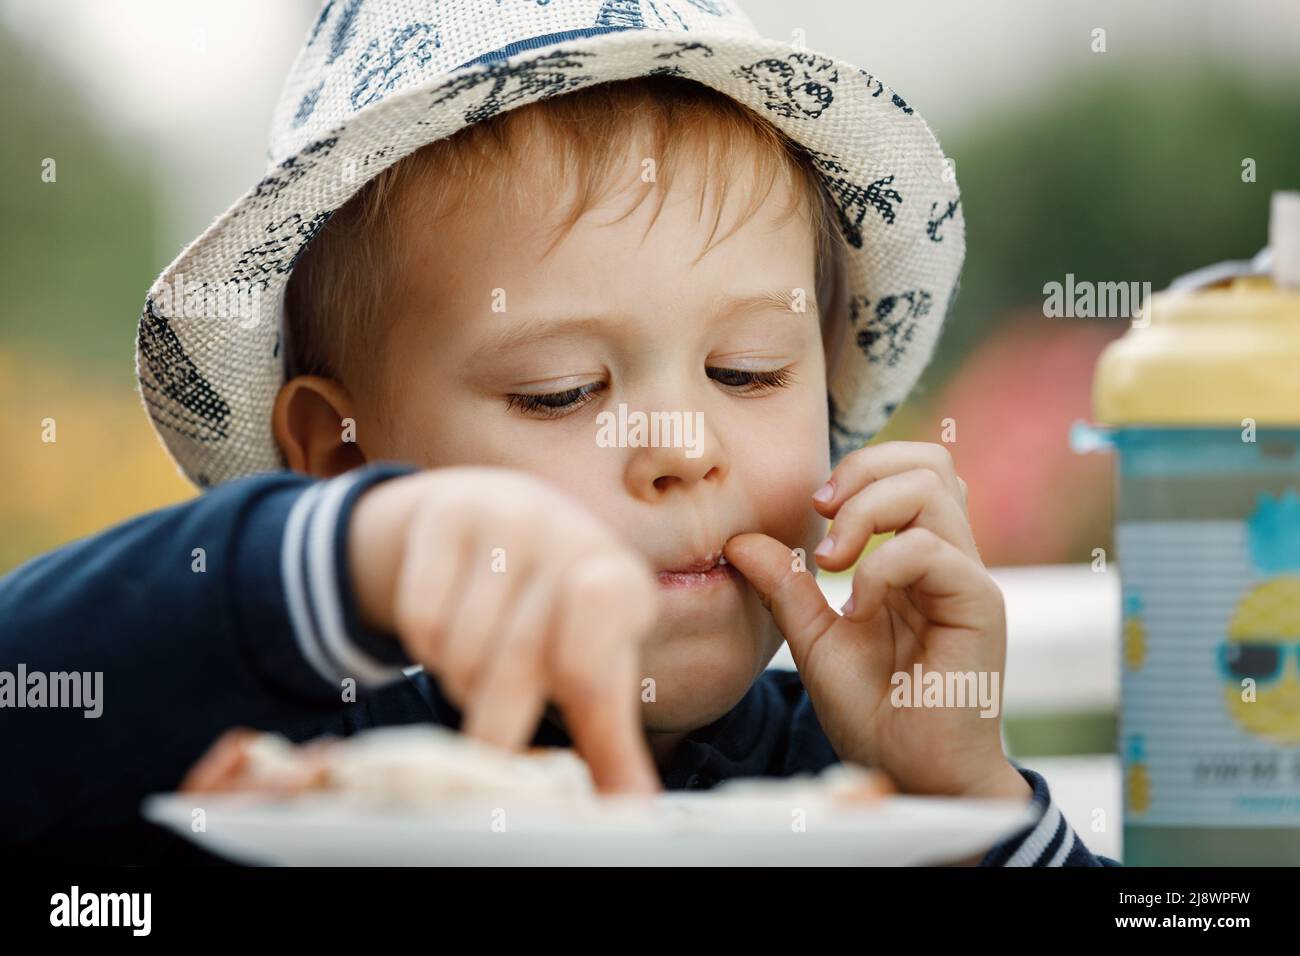 The boy in the summer garden chooses and tastes food from a plate. Stock Photo